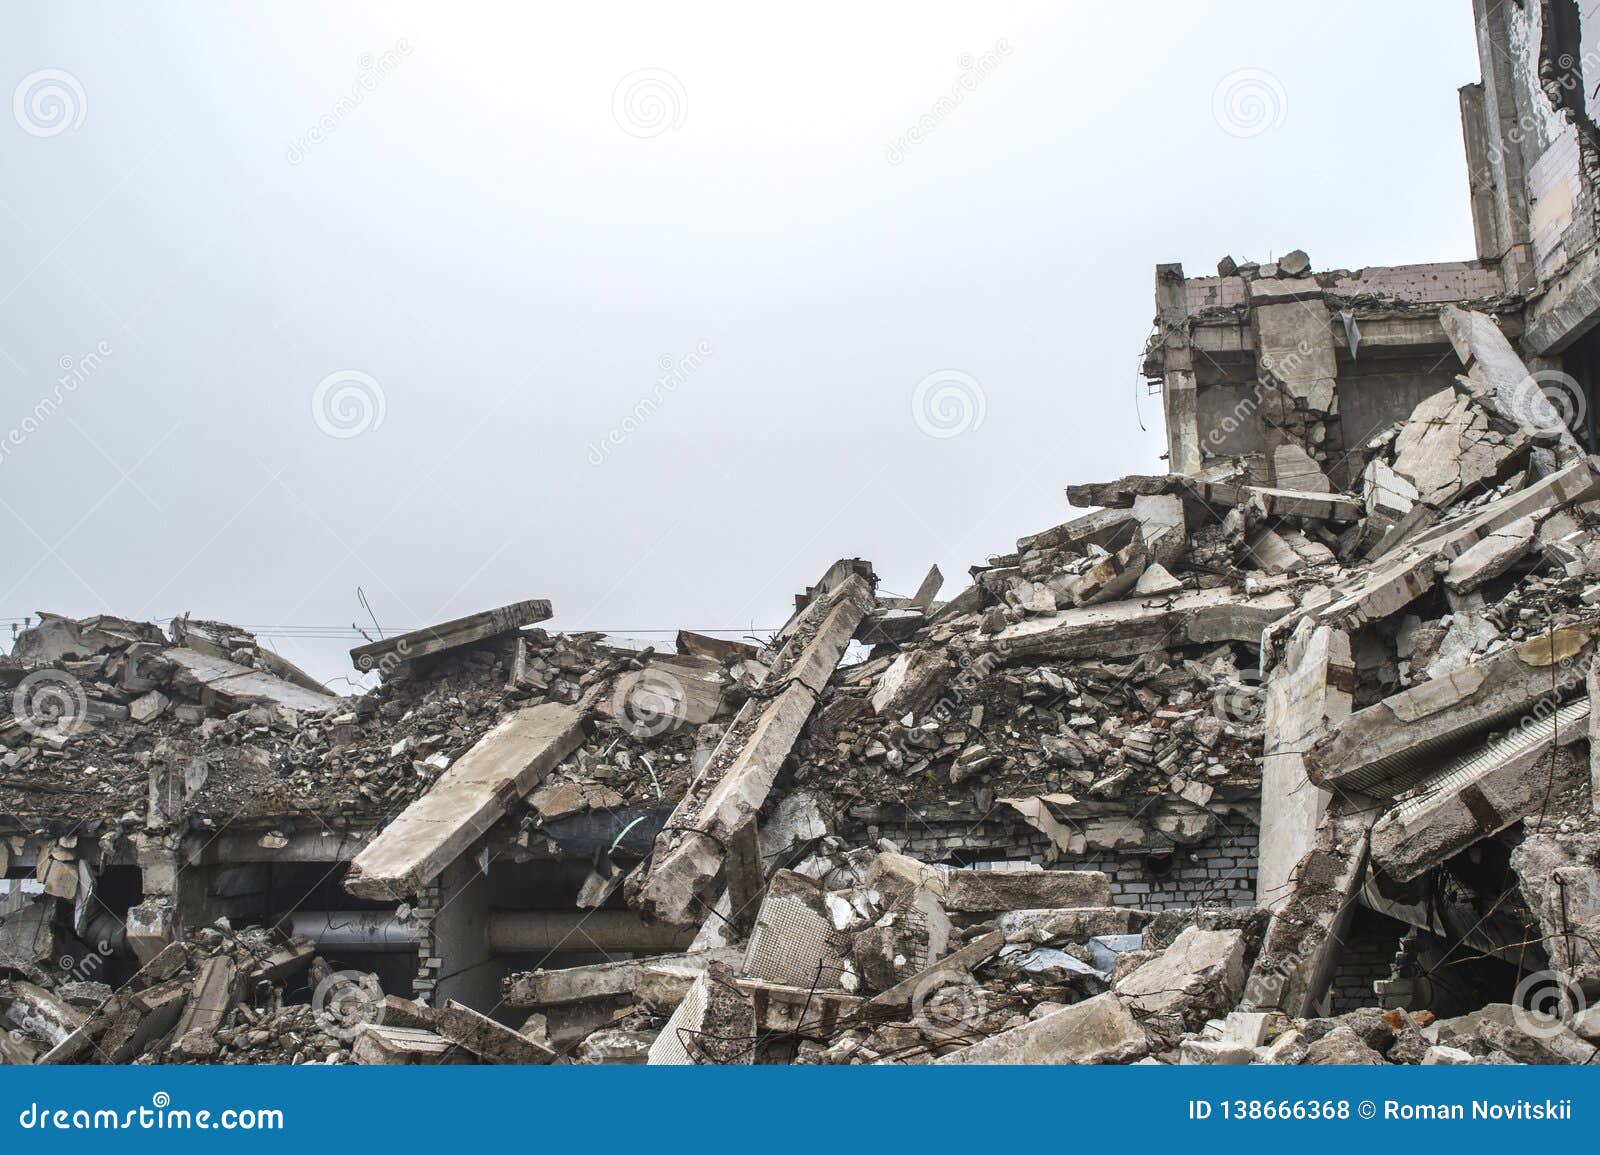 a huge pile of gray concrete debris from piles and stones of the destroyed building. the impact of the destruction